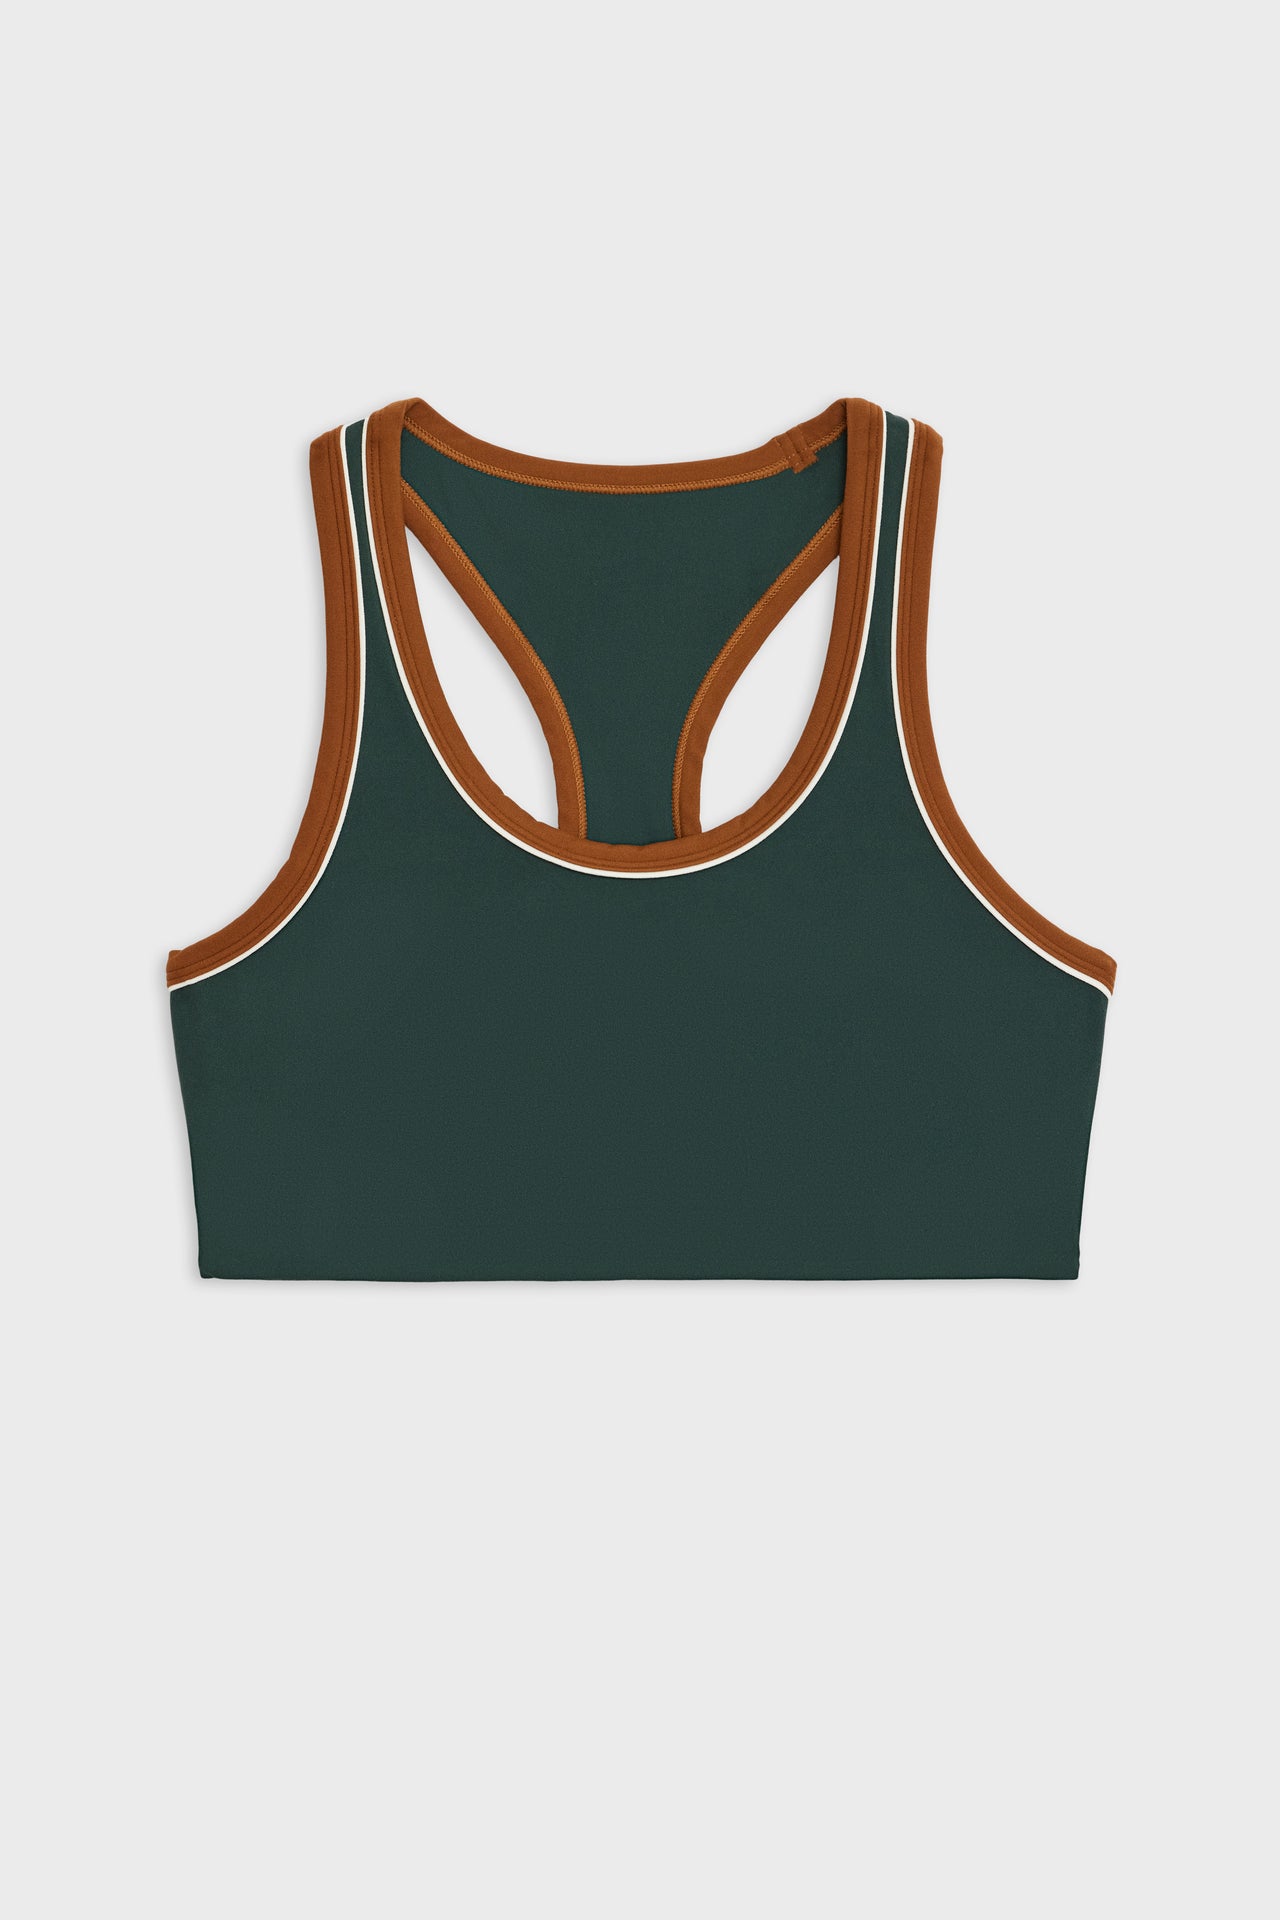 Front flat view of dark green bra with white and dark orange border arm and neckline and racerback